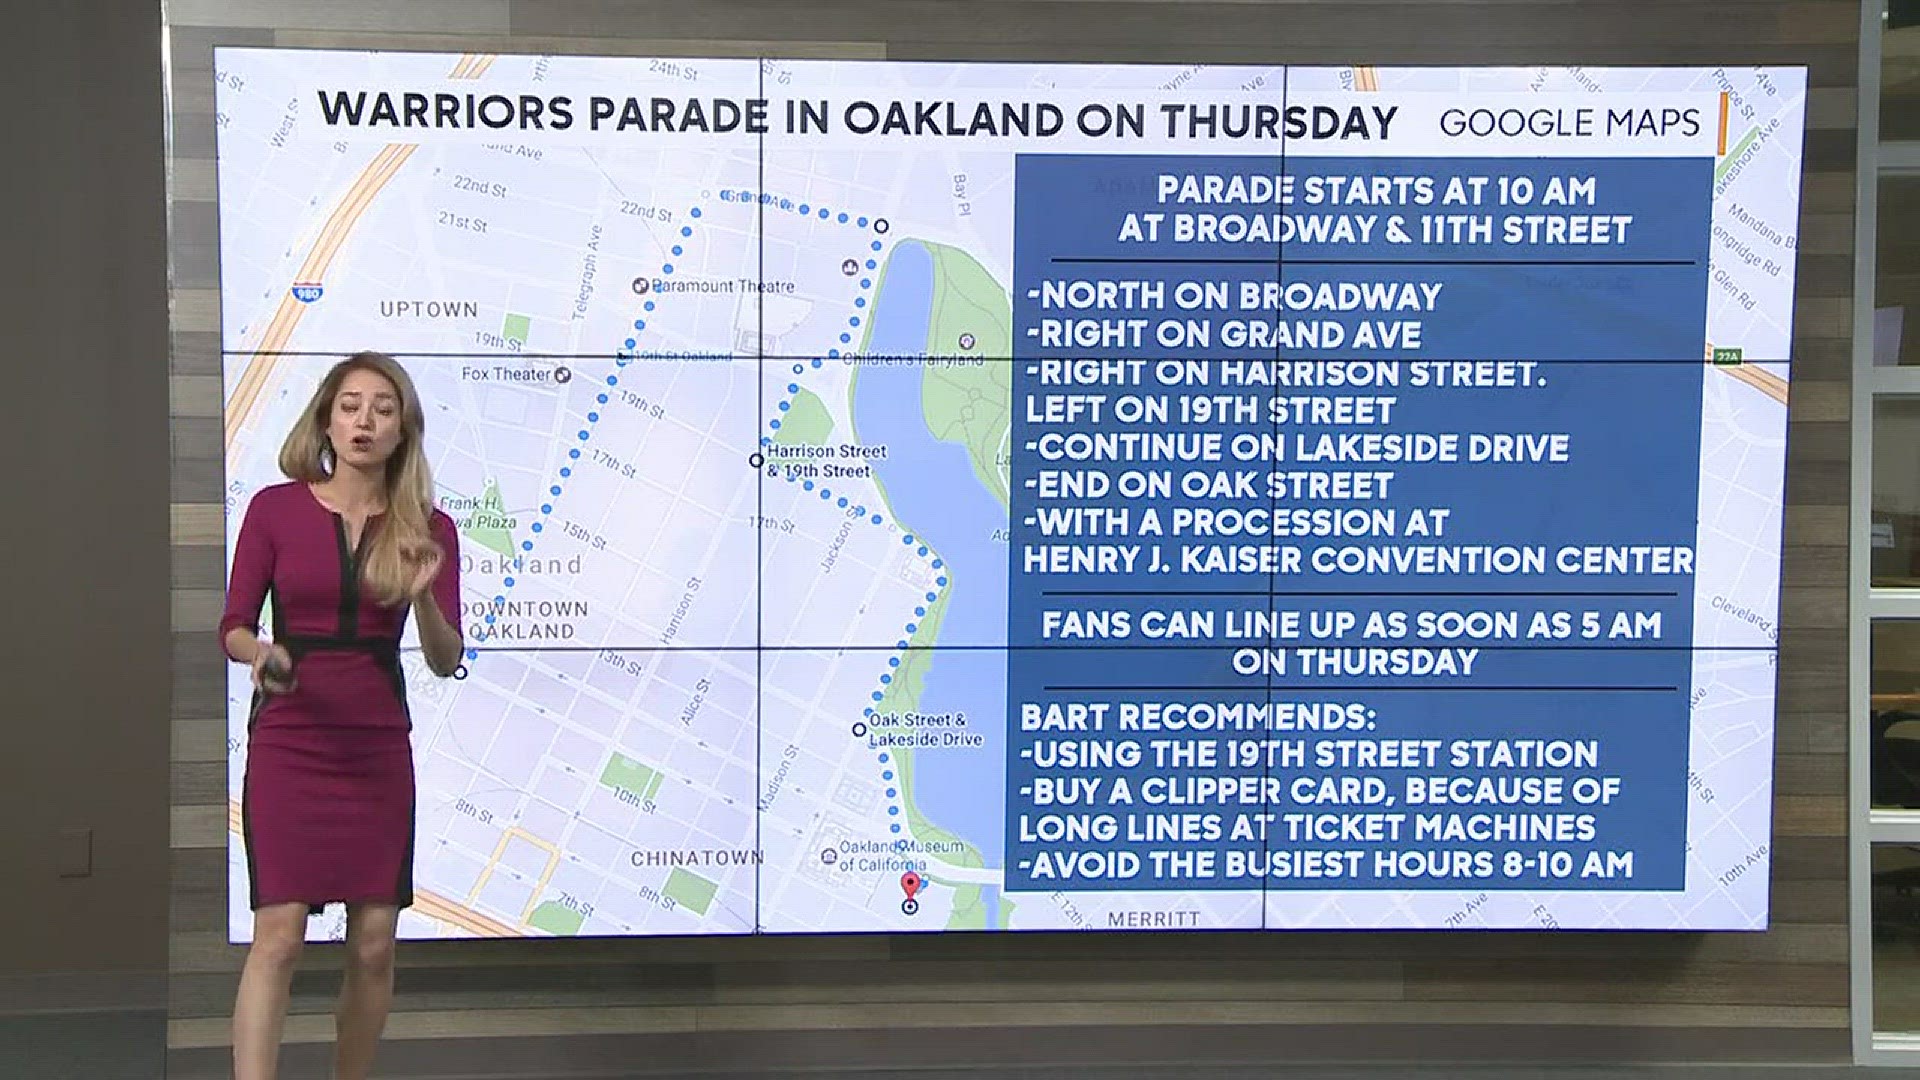 Parade route and road closures for Golden State Warriors celebration parade in Downtown Oakland on Thursday